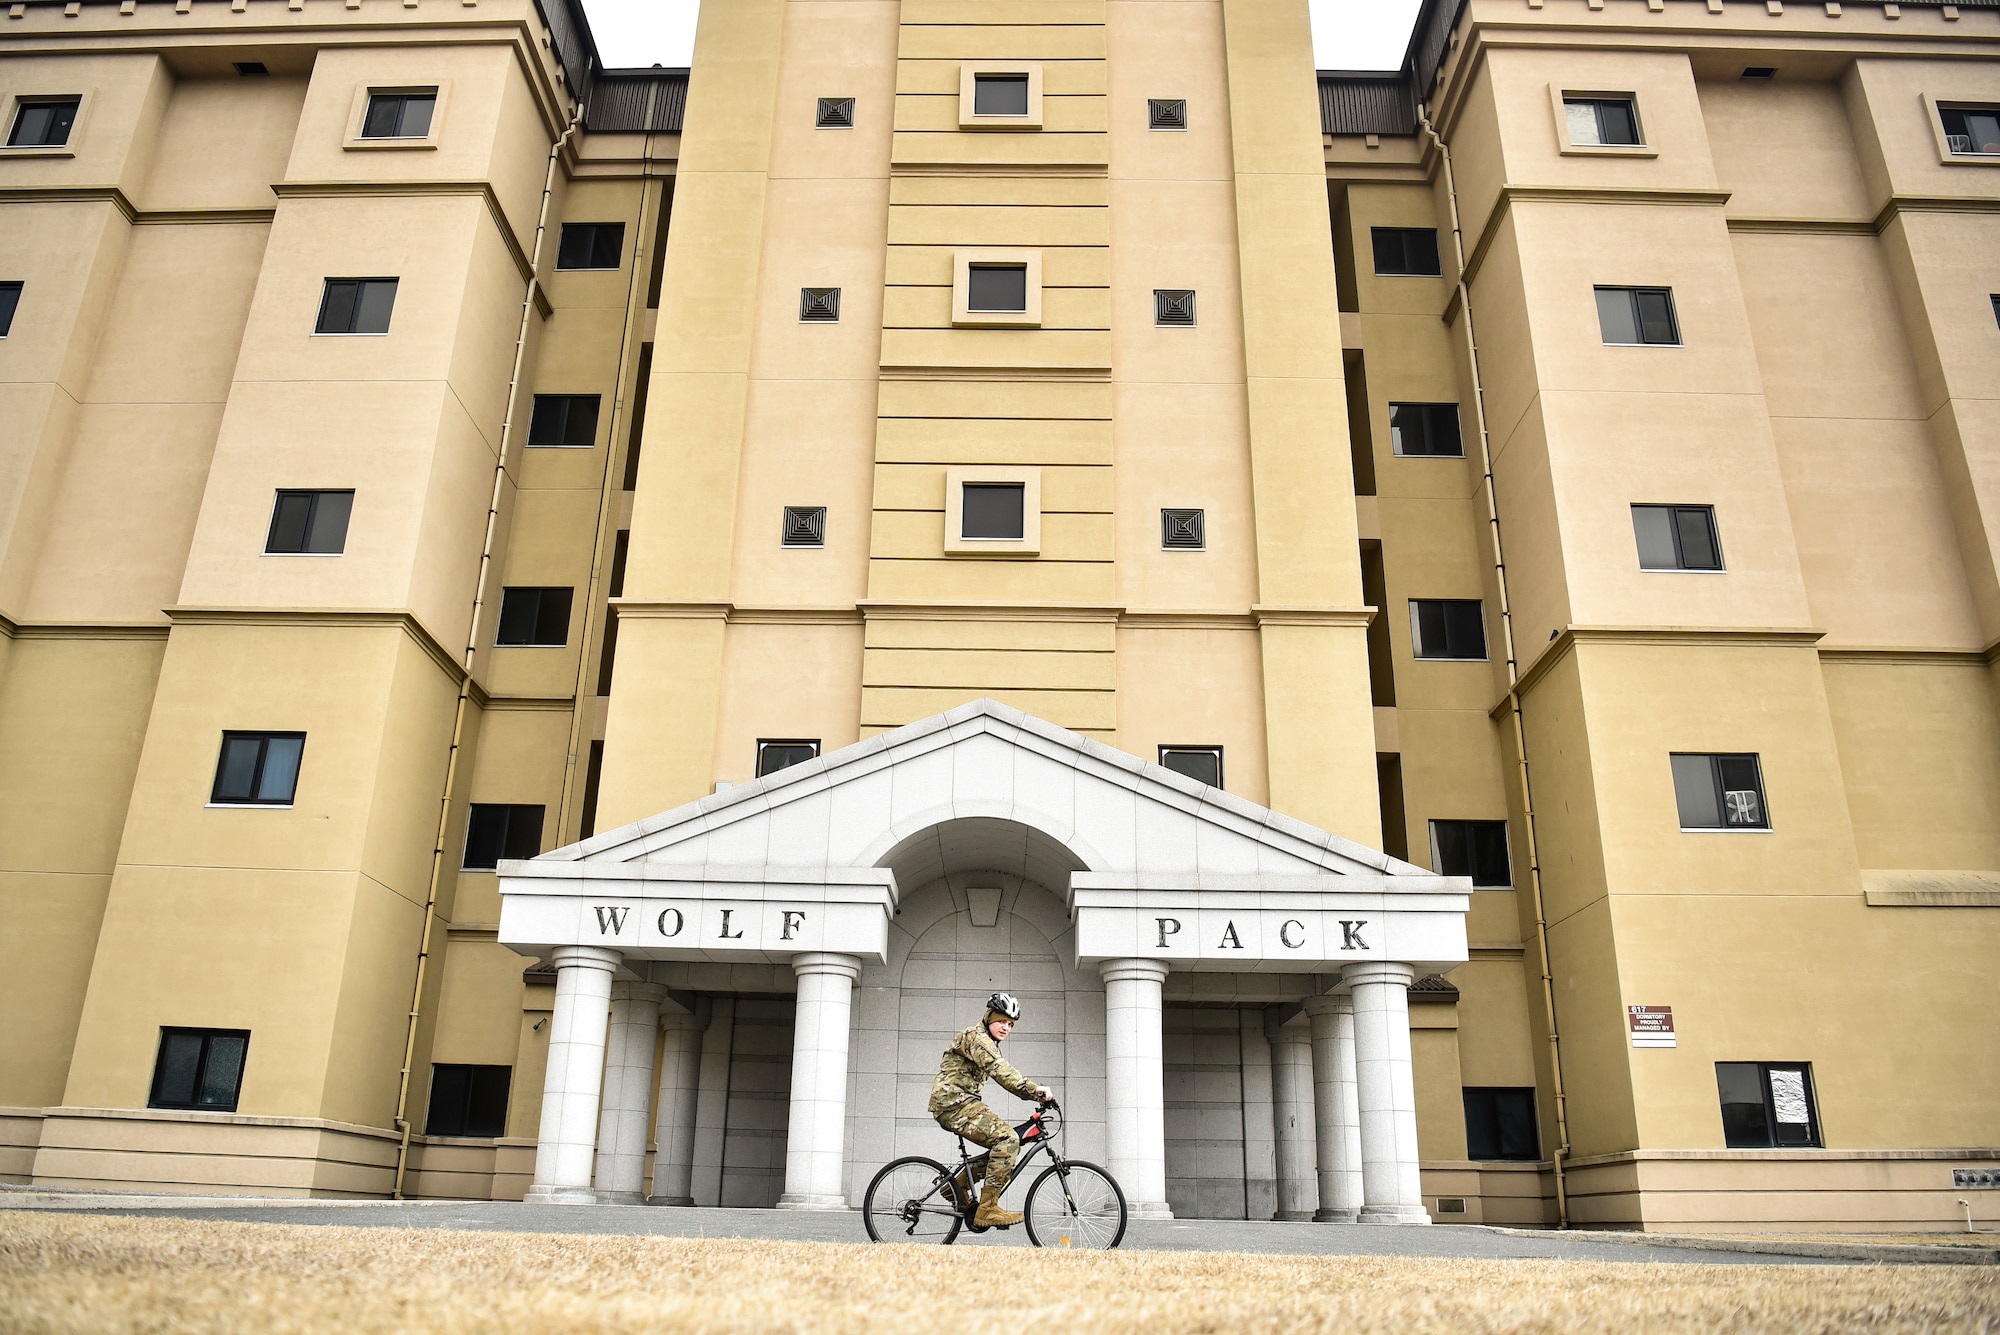 An Airman cycles by a building.